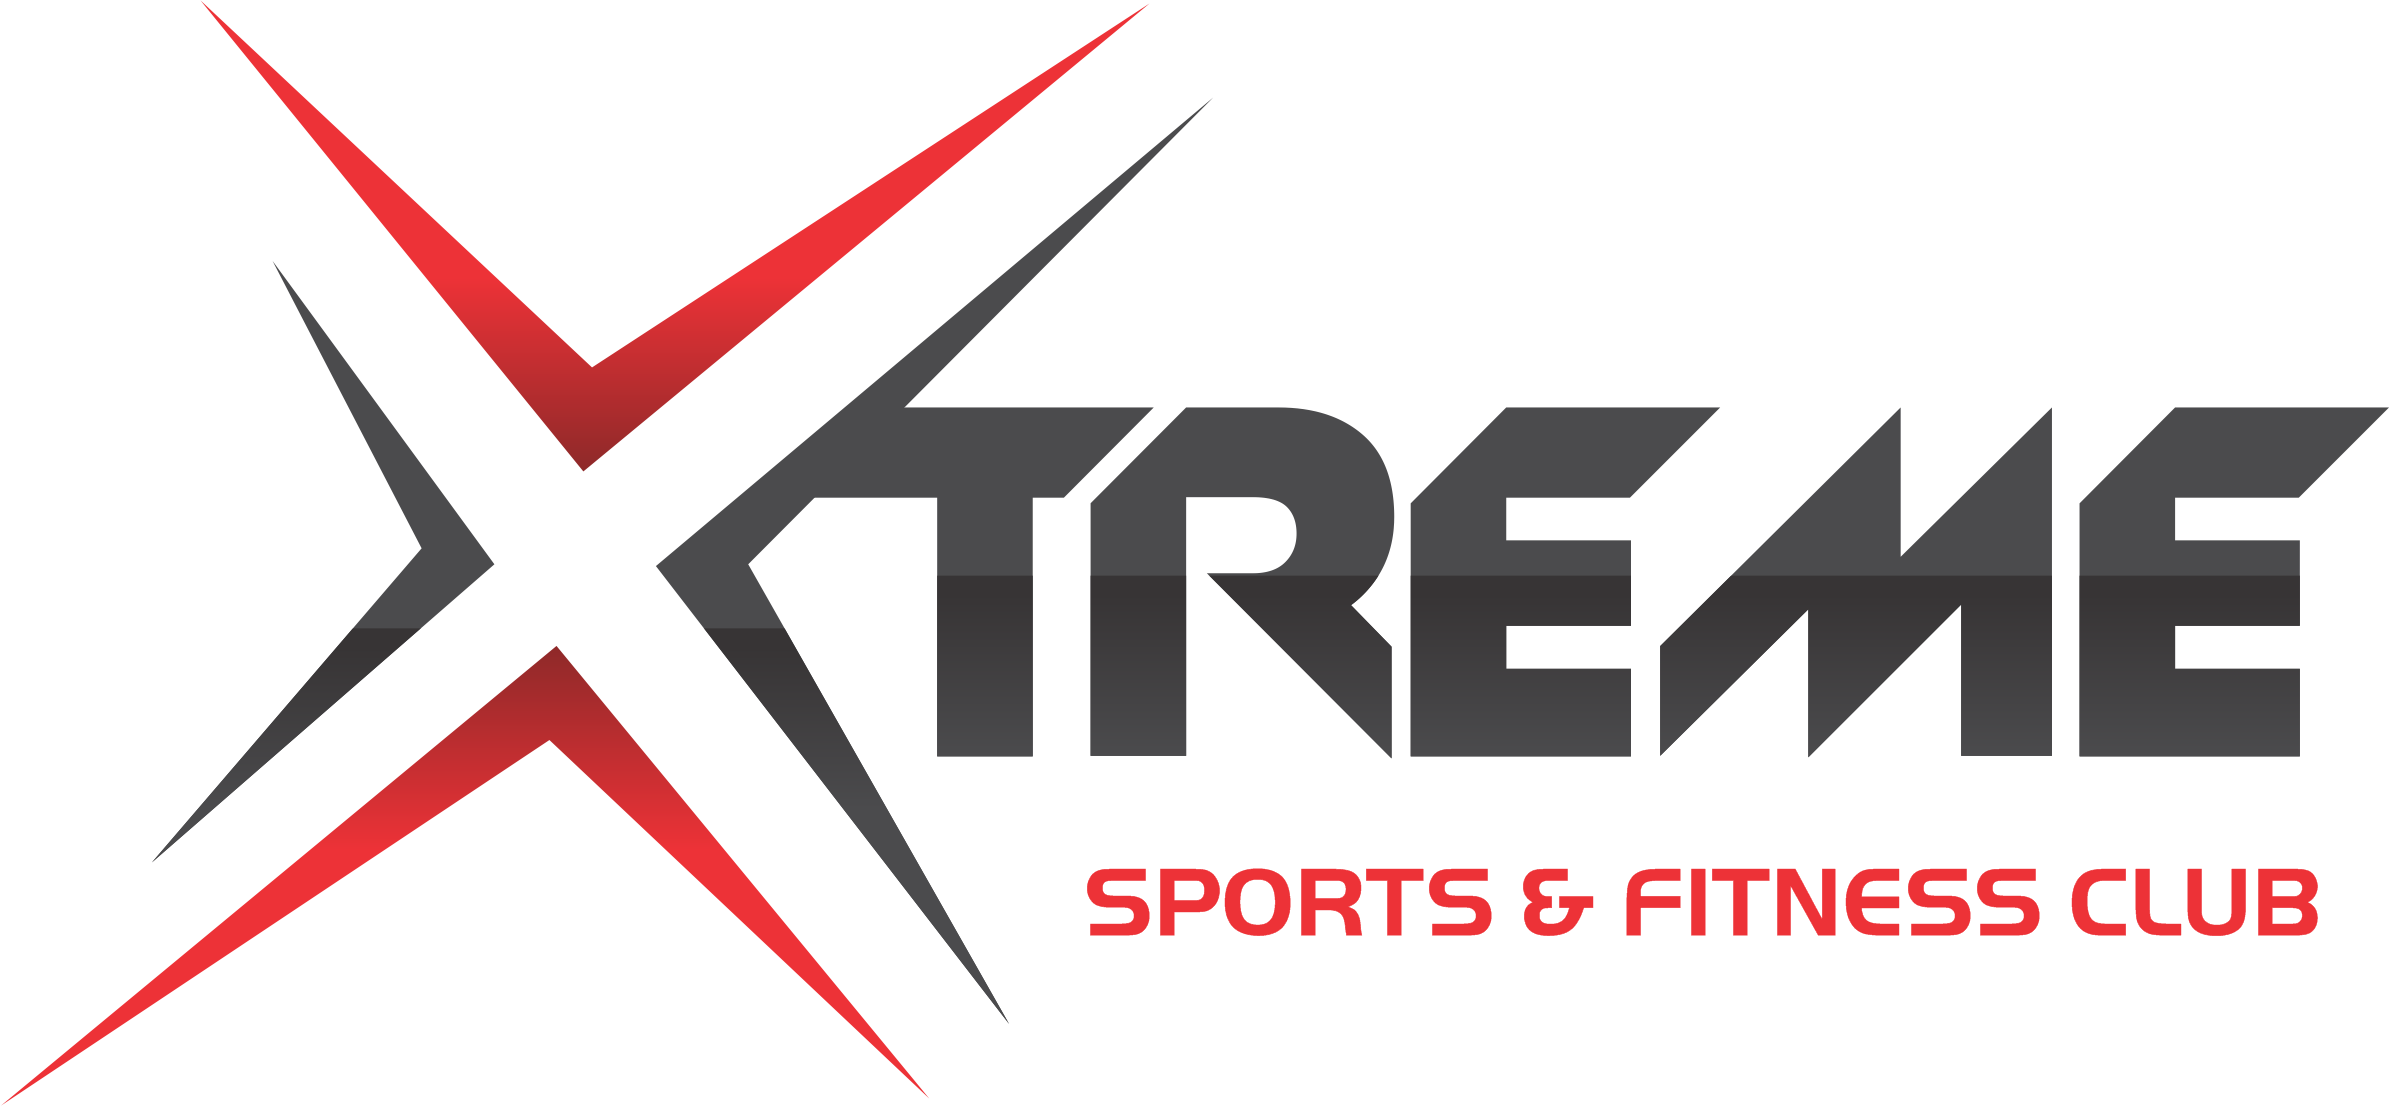 Xtreme Sports and Fitness Club|Gym and Fitness Centre|Active Life